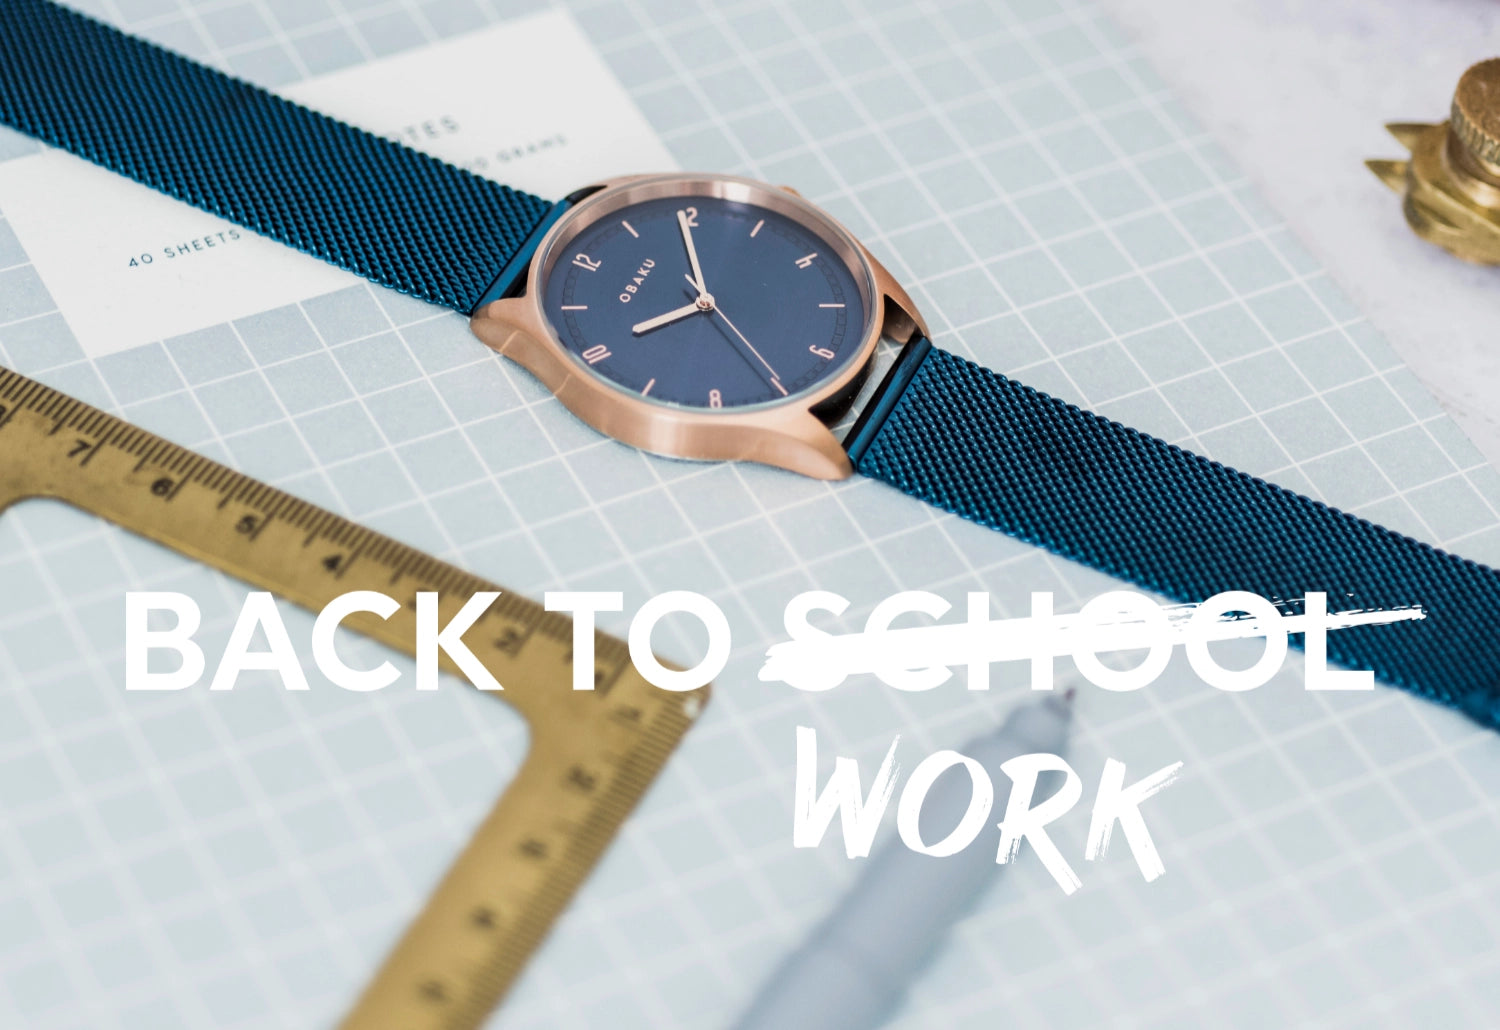 FIVE TIPS TO GET BACK TO WORK WITH EASE